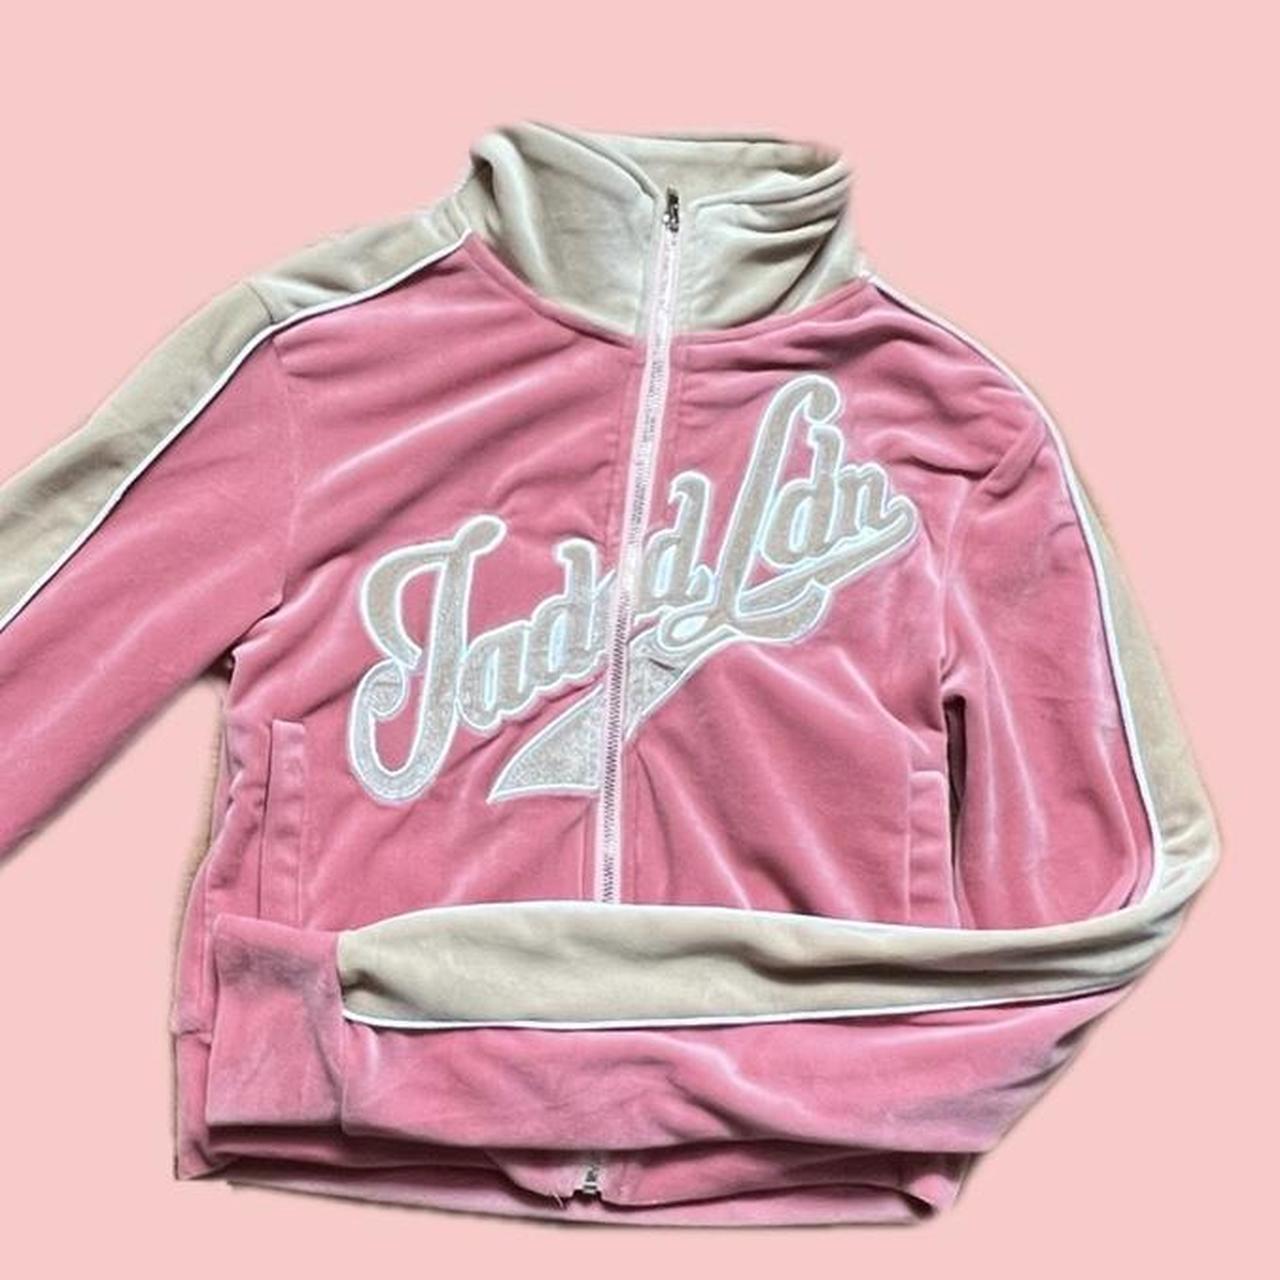 Jaded London Women's Pink and Cream Jacket